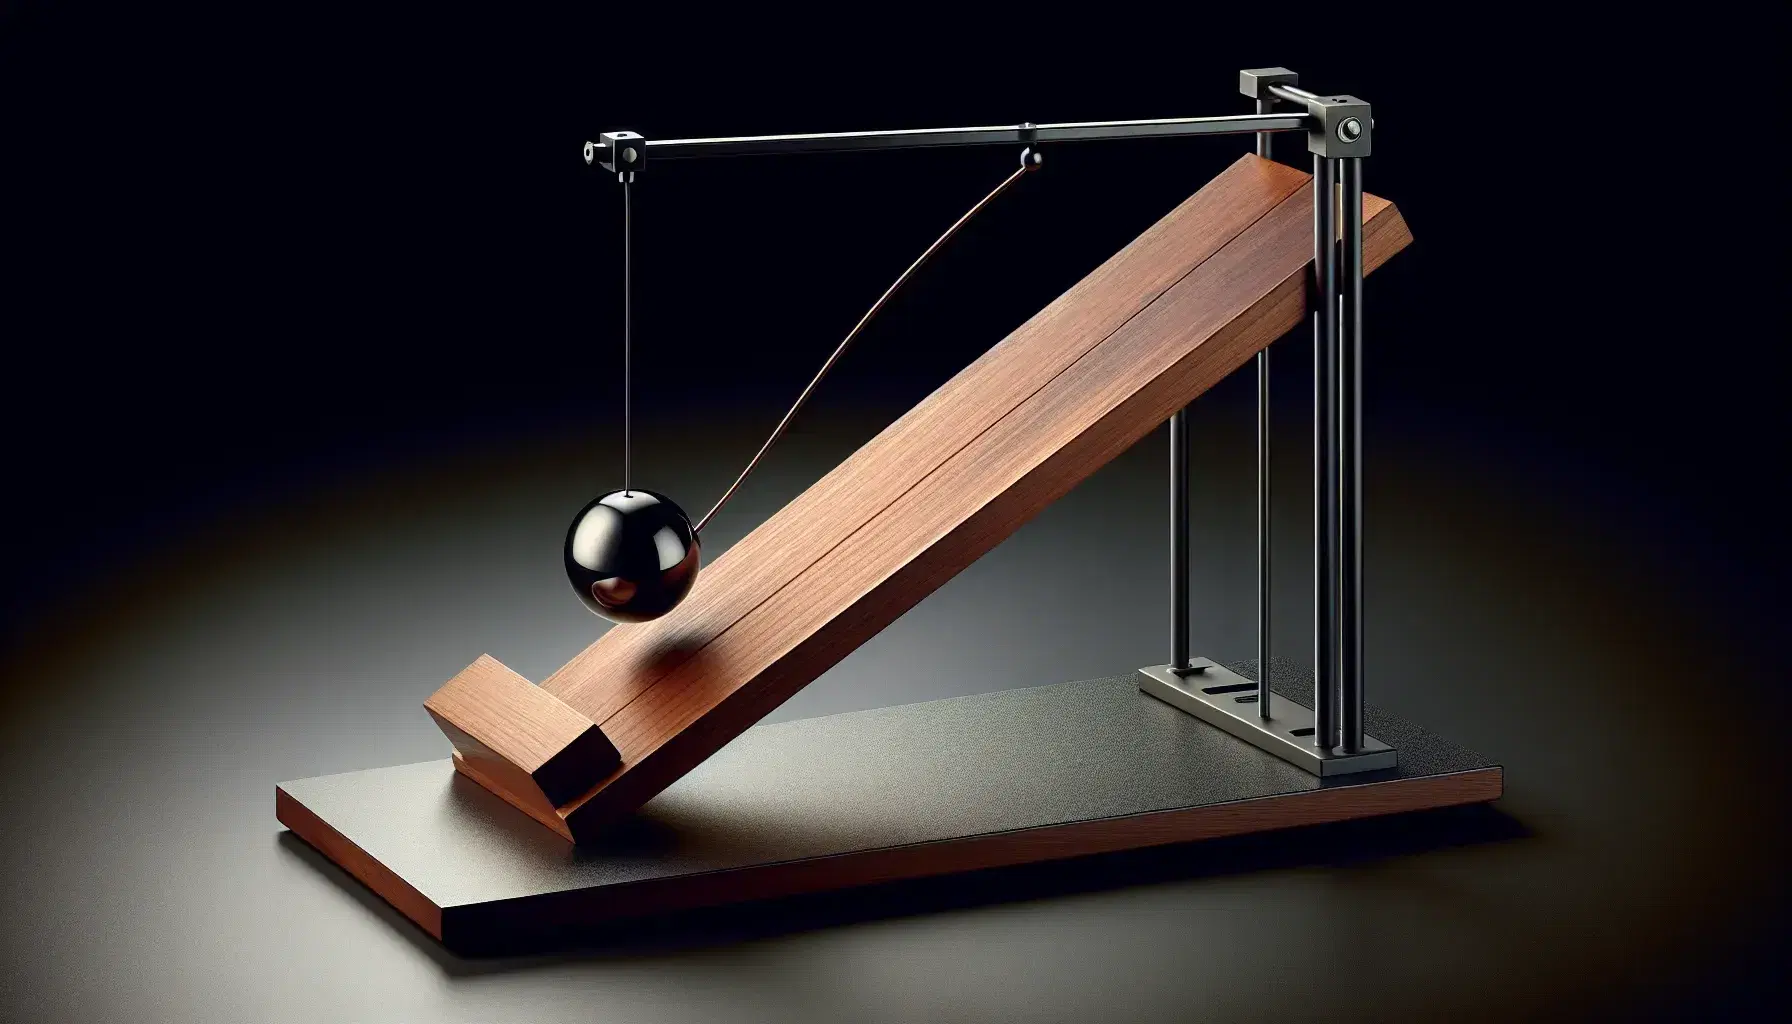 Classic physics experiment setup with an inclined wooden plane at a 30-degree angle, a resting pendulum, and a pebble sinking in water, on a light gray background.